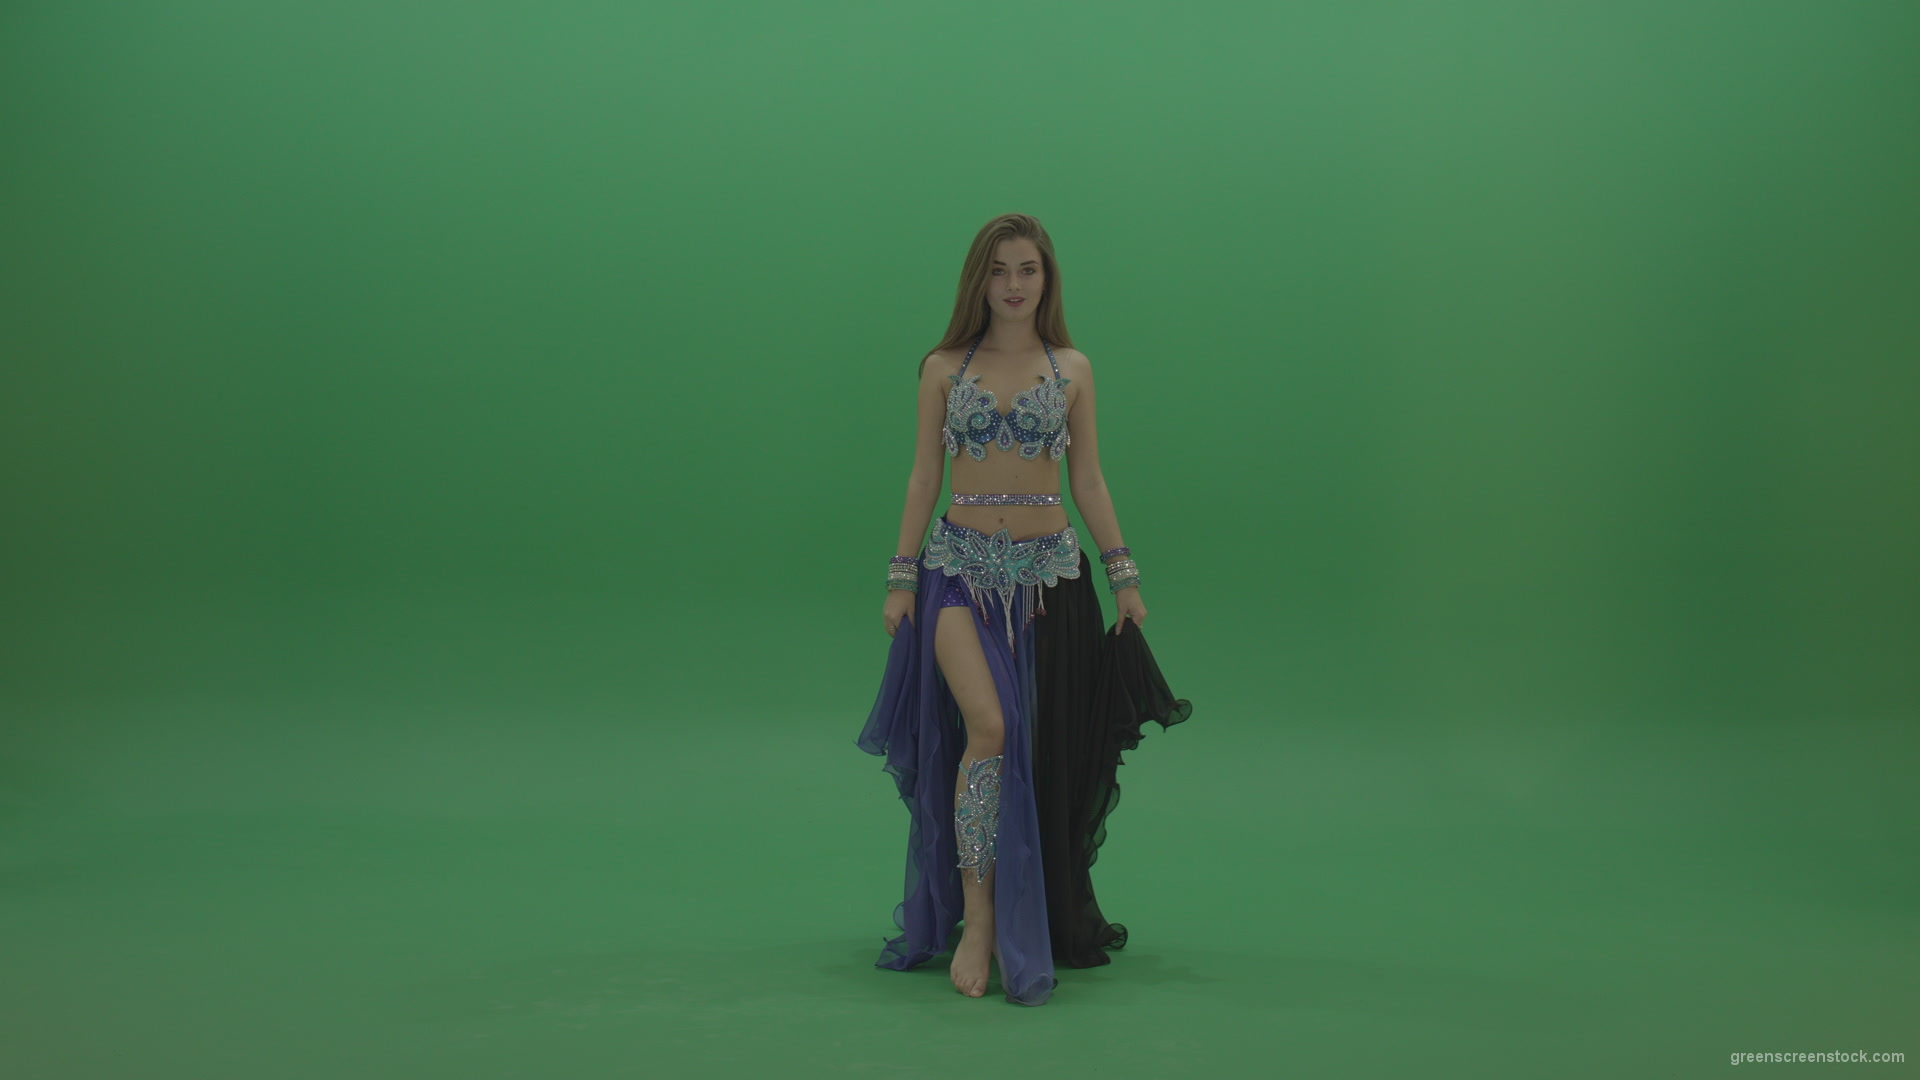 Splendid-belly-dancer-in-purple-and-black-wear-display-amazing-dance-moves-over-chromakey-background_001 Green Screen Stock